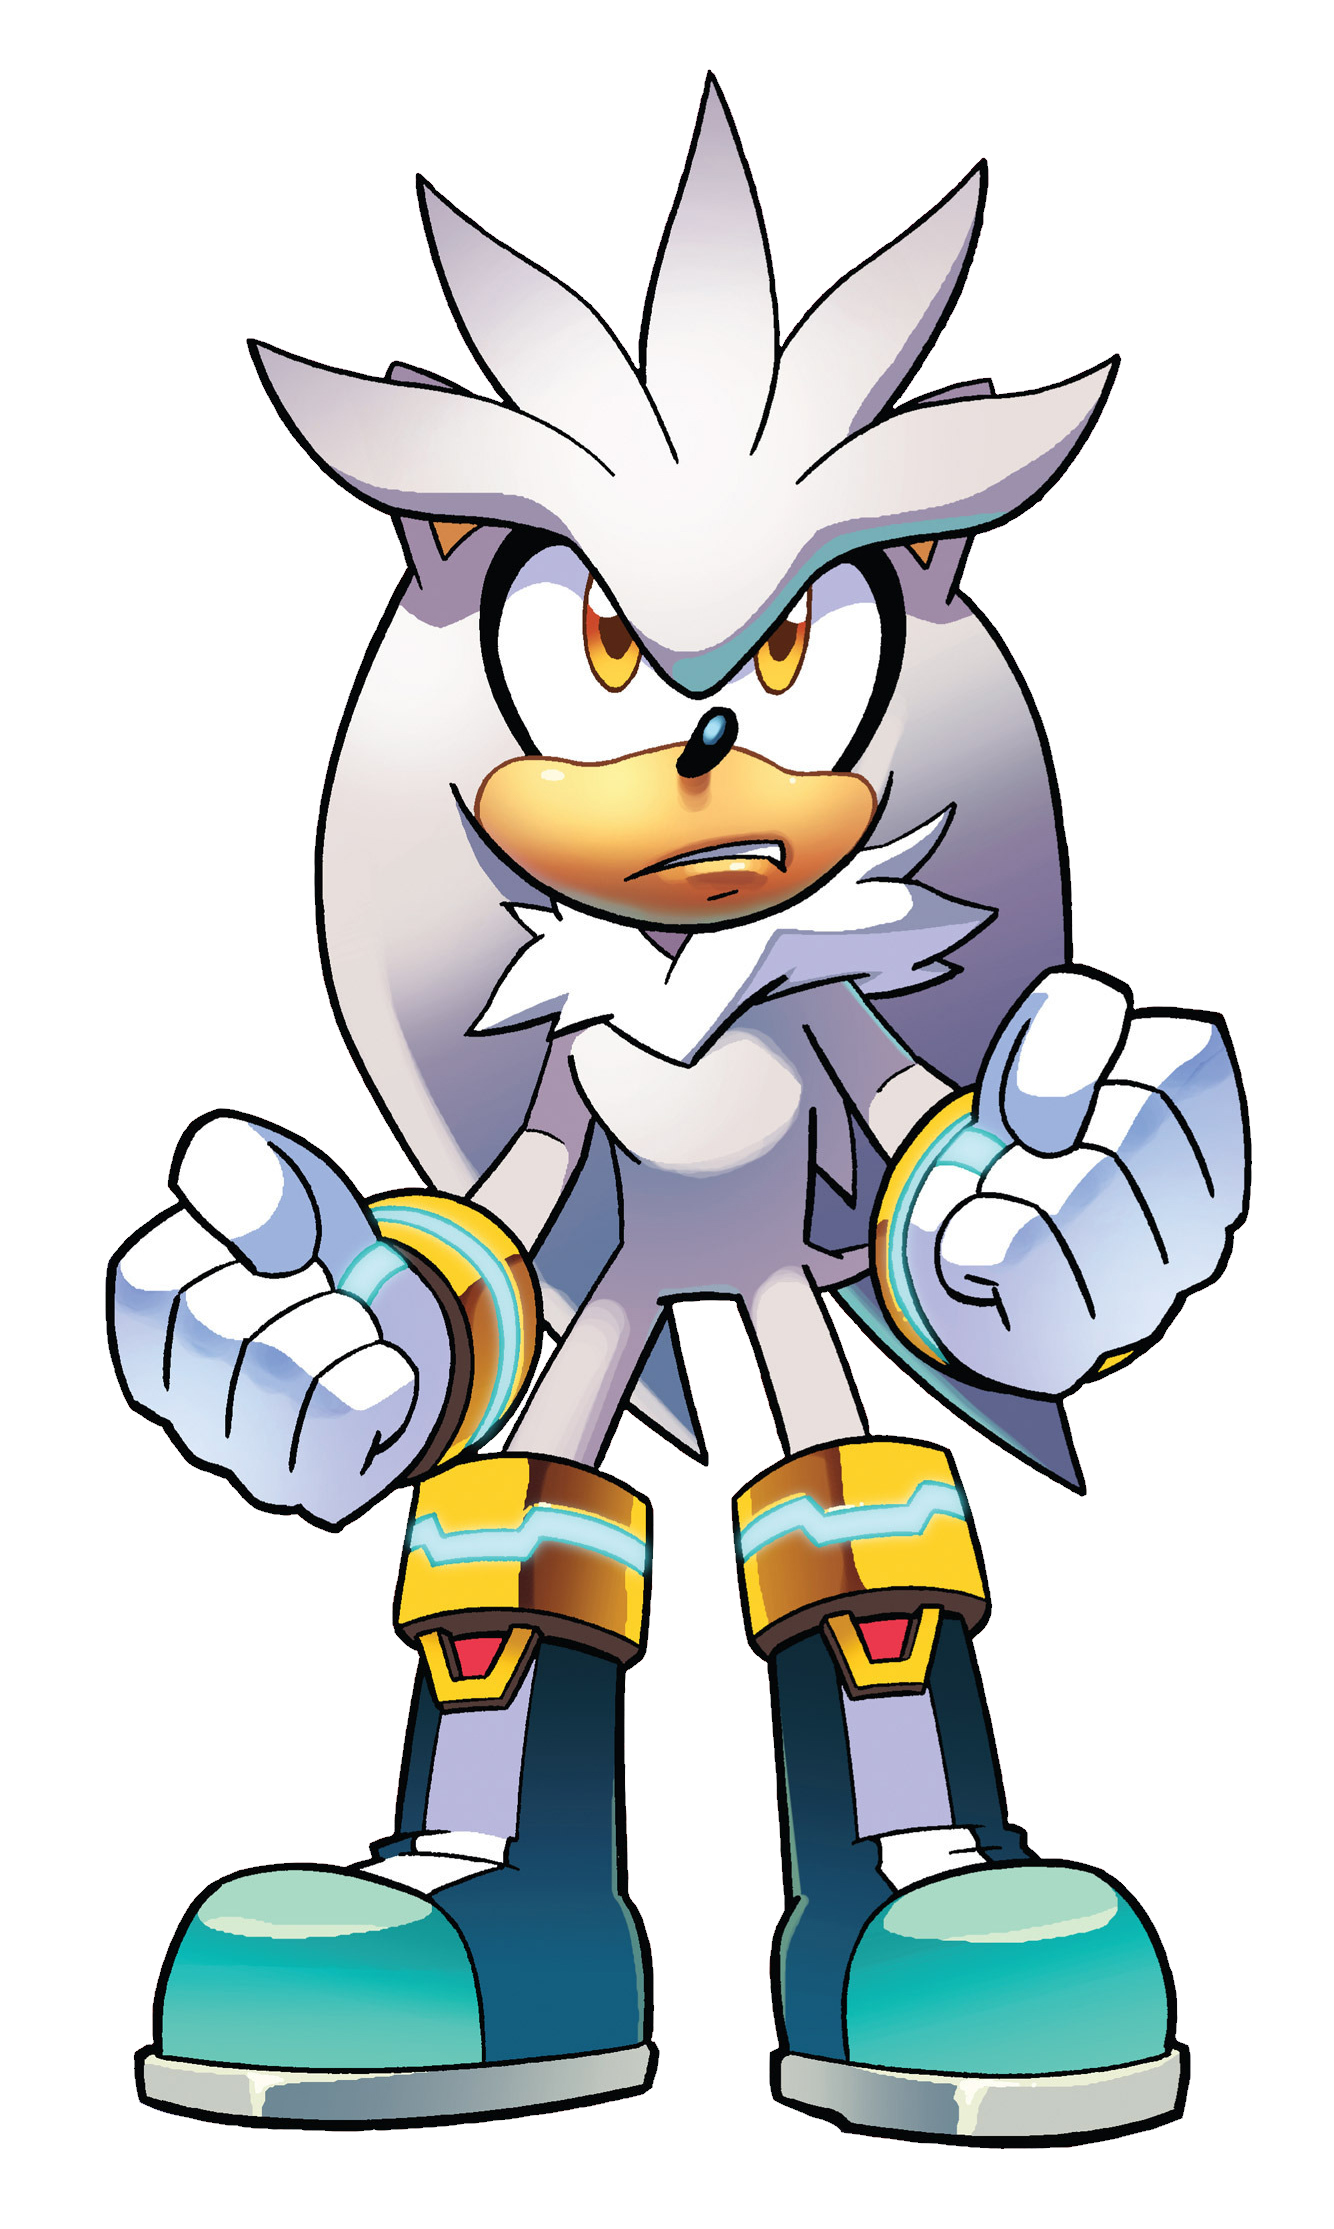 Silver the Hedgehog (Archie) | Sonic News Network | FANDOM powered by Wikia